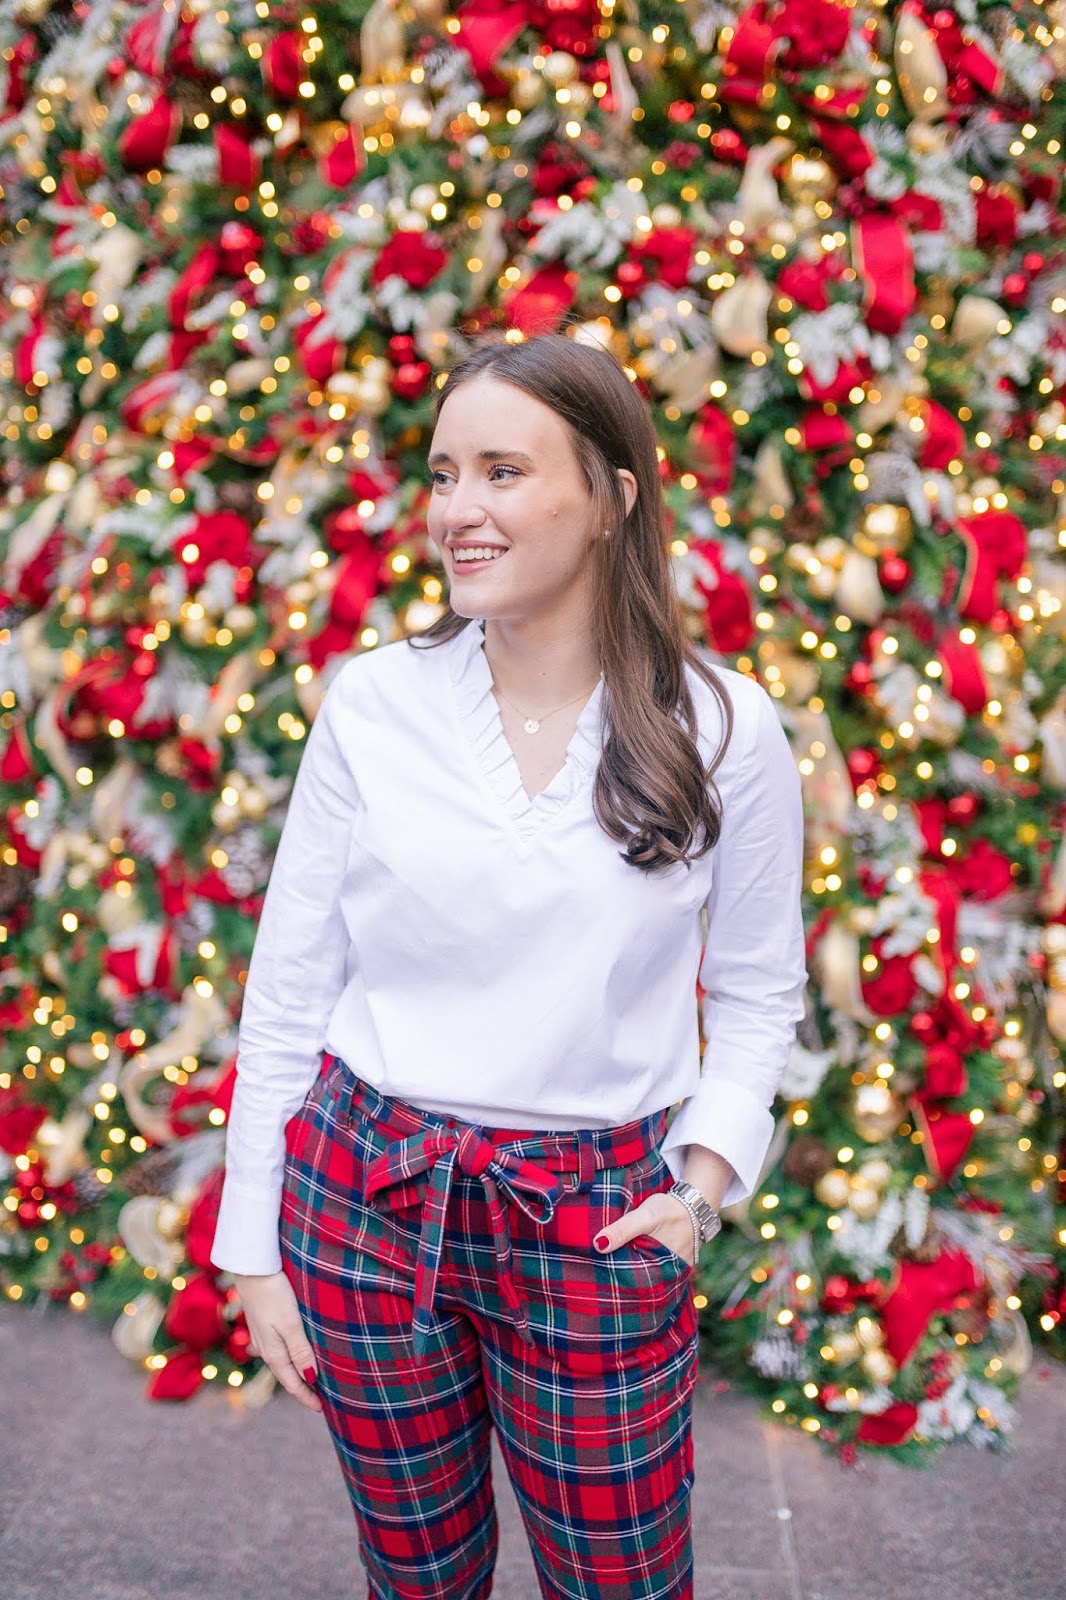 Vineyard Vines Holiday 2019 | Connecticut Fashion and Lifestyle Blog ...